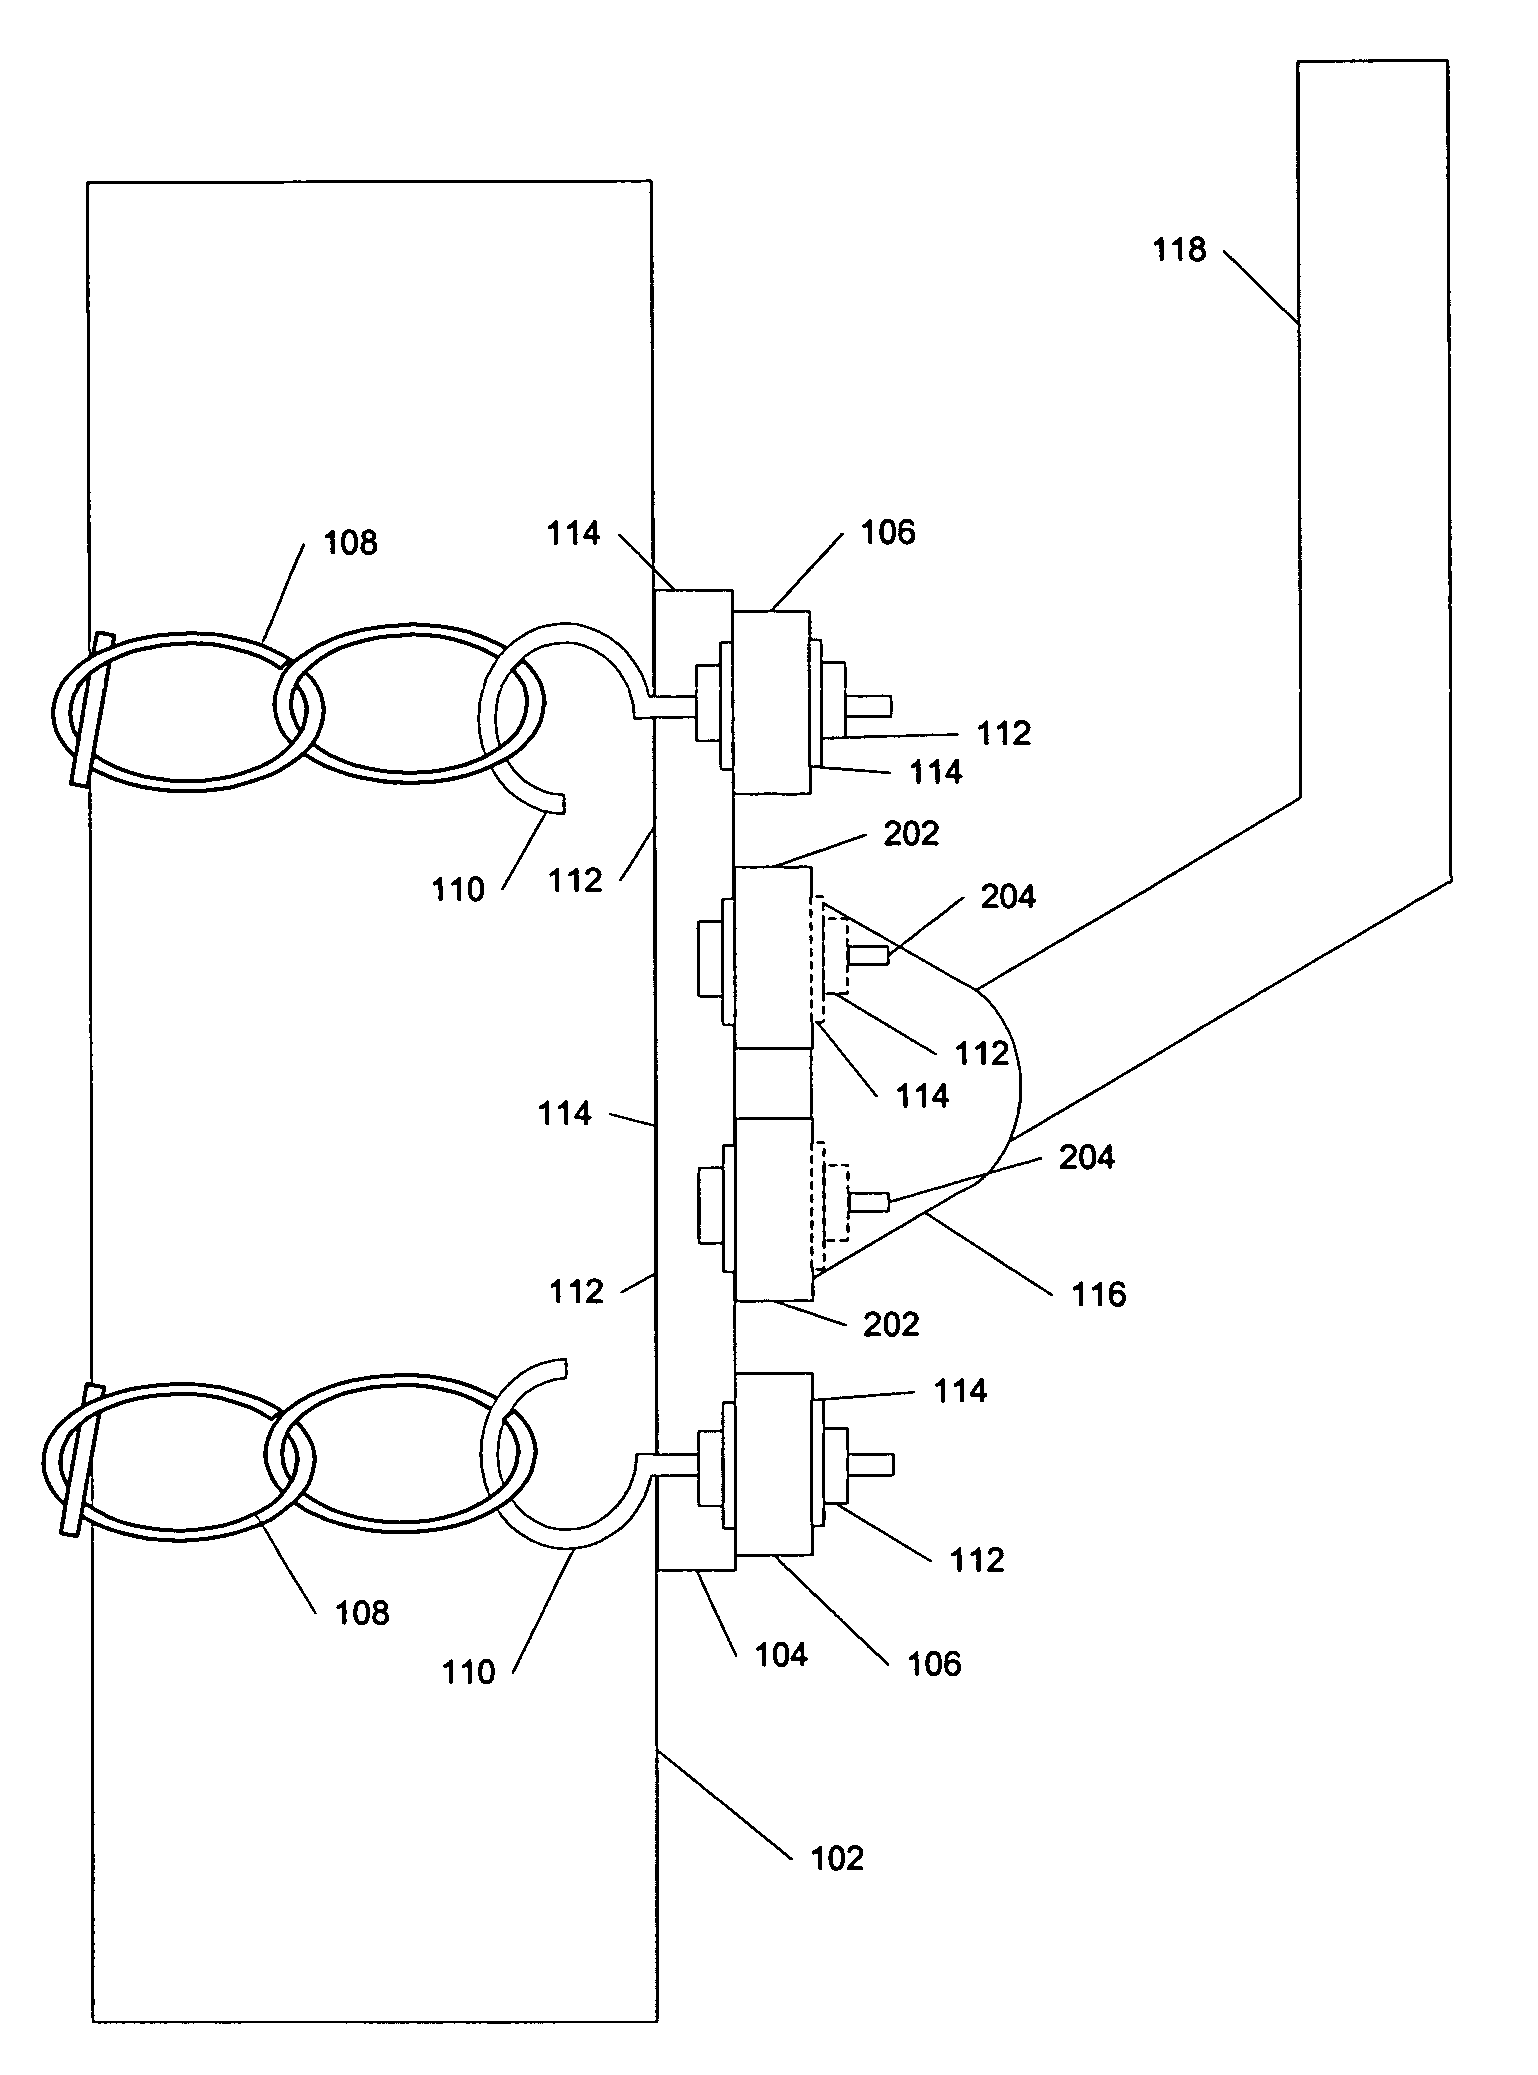 Apparatus and method for mounting a satellite dish to a pole